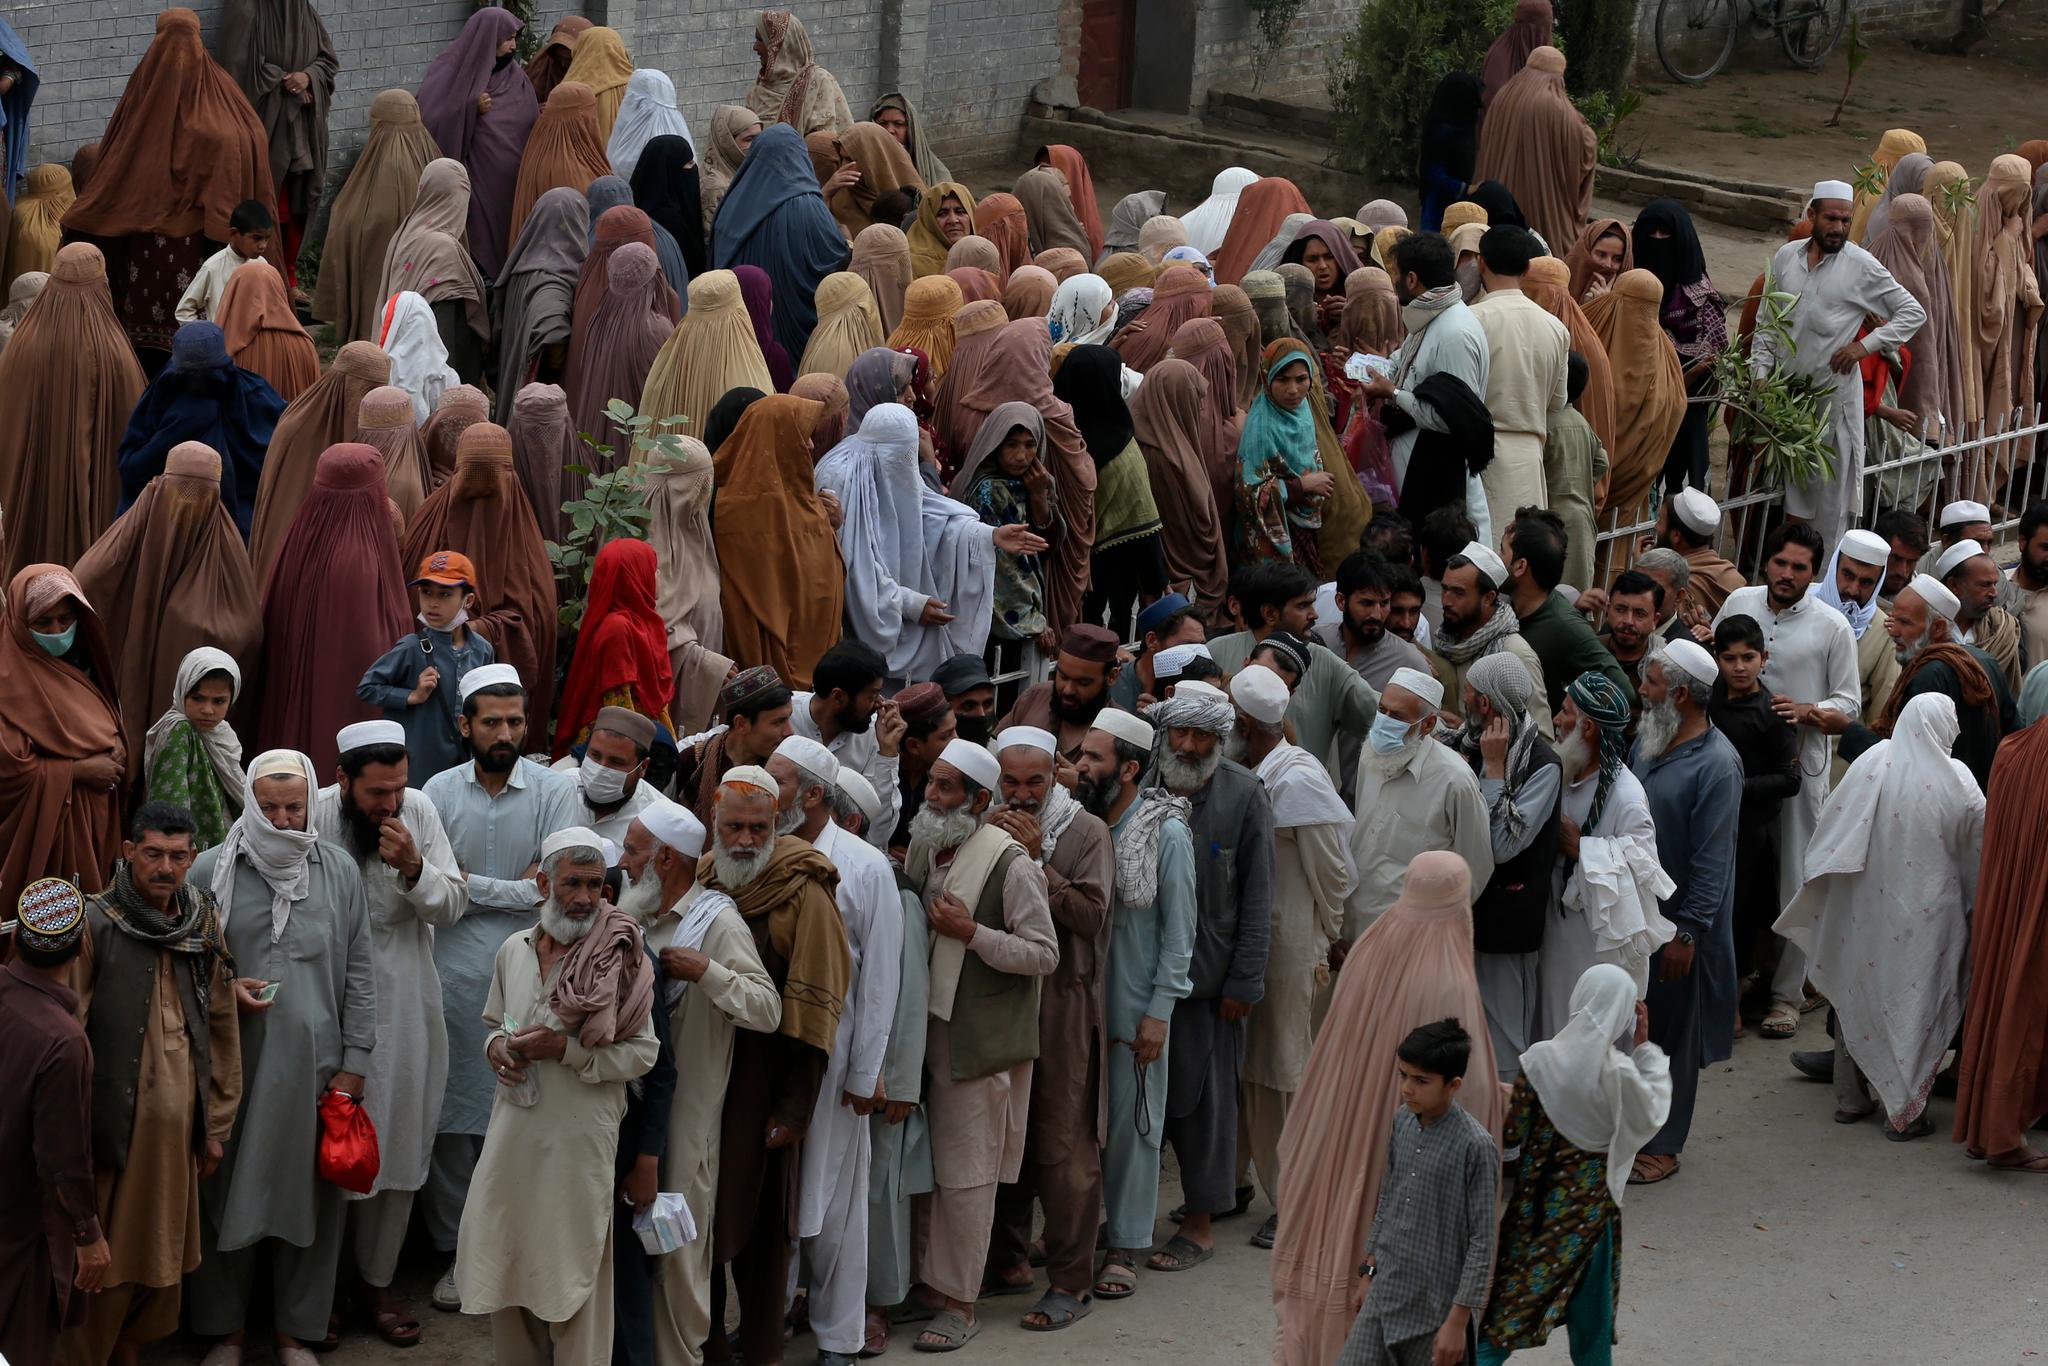 Why Are Over 800,000 Pakistanis Fleeing the Country?